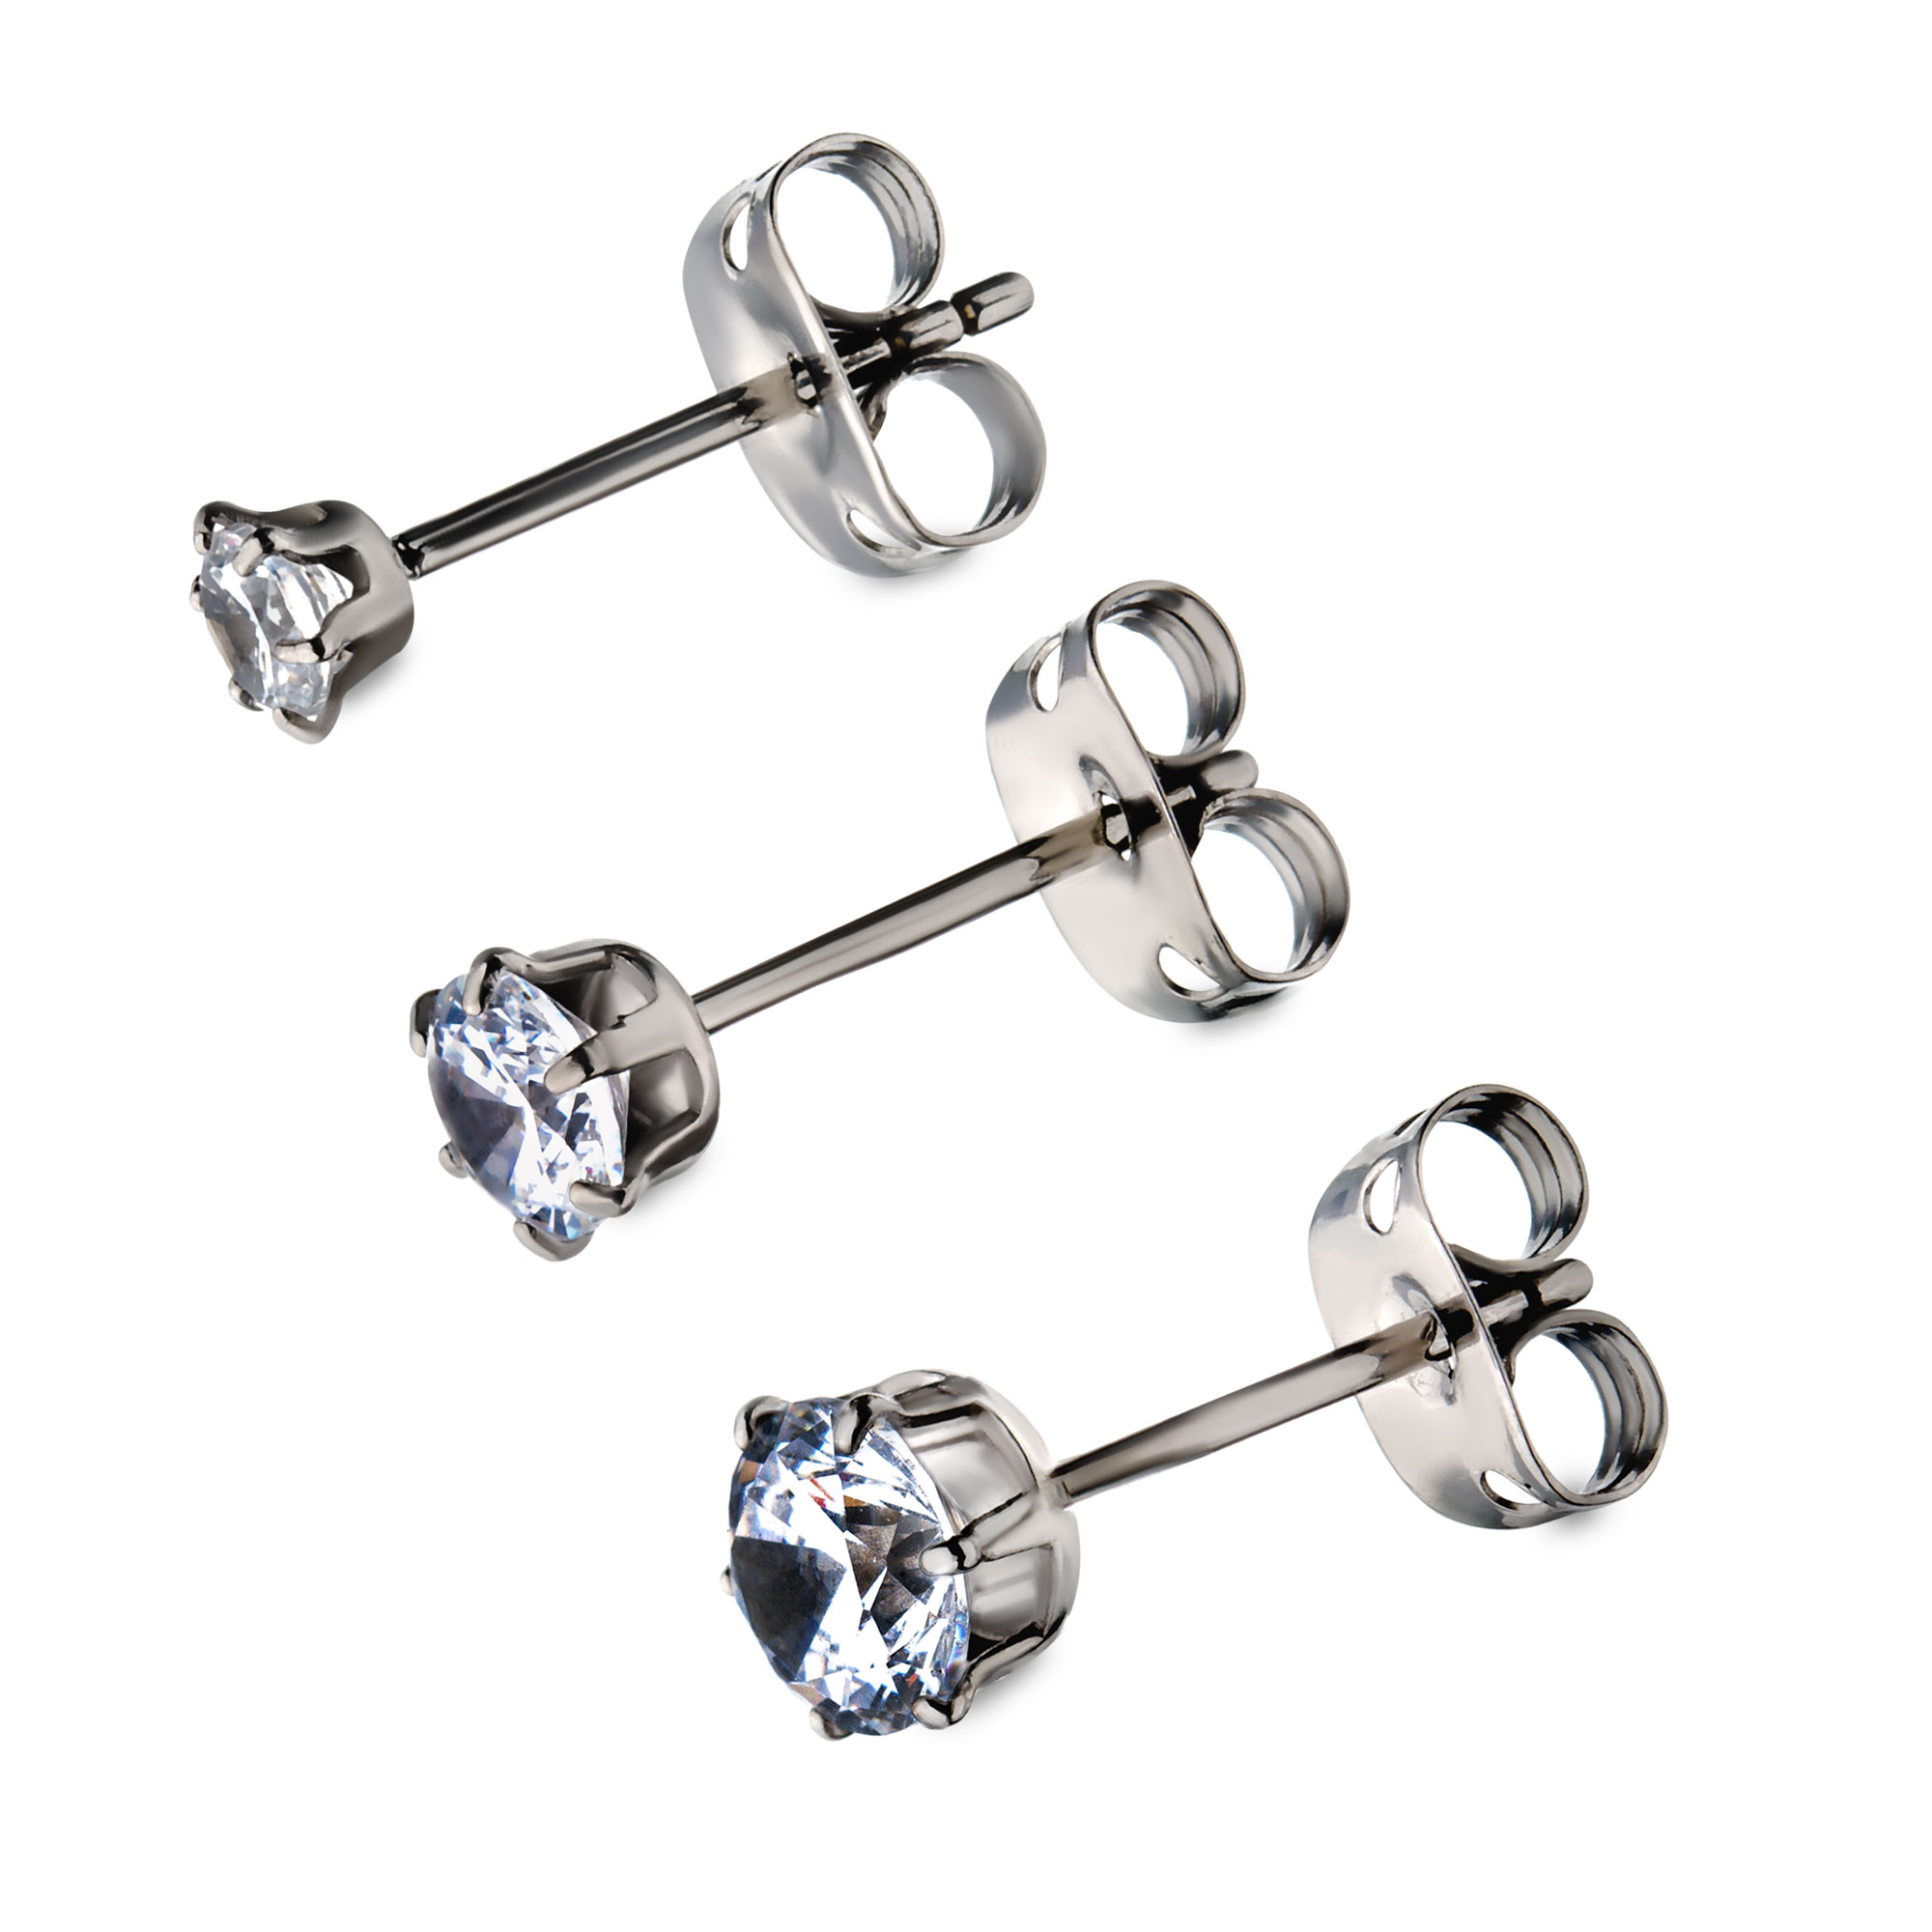 20g Titanium Post and Butterfly Back with Prong Set CZ Stud Earrings Image 2 Spath Jewelers Bartow, FL